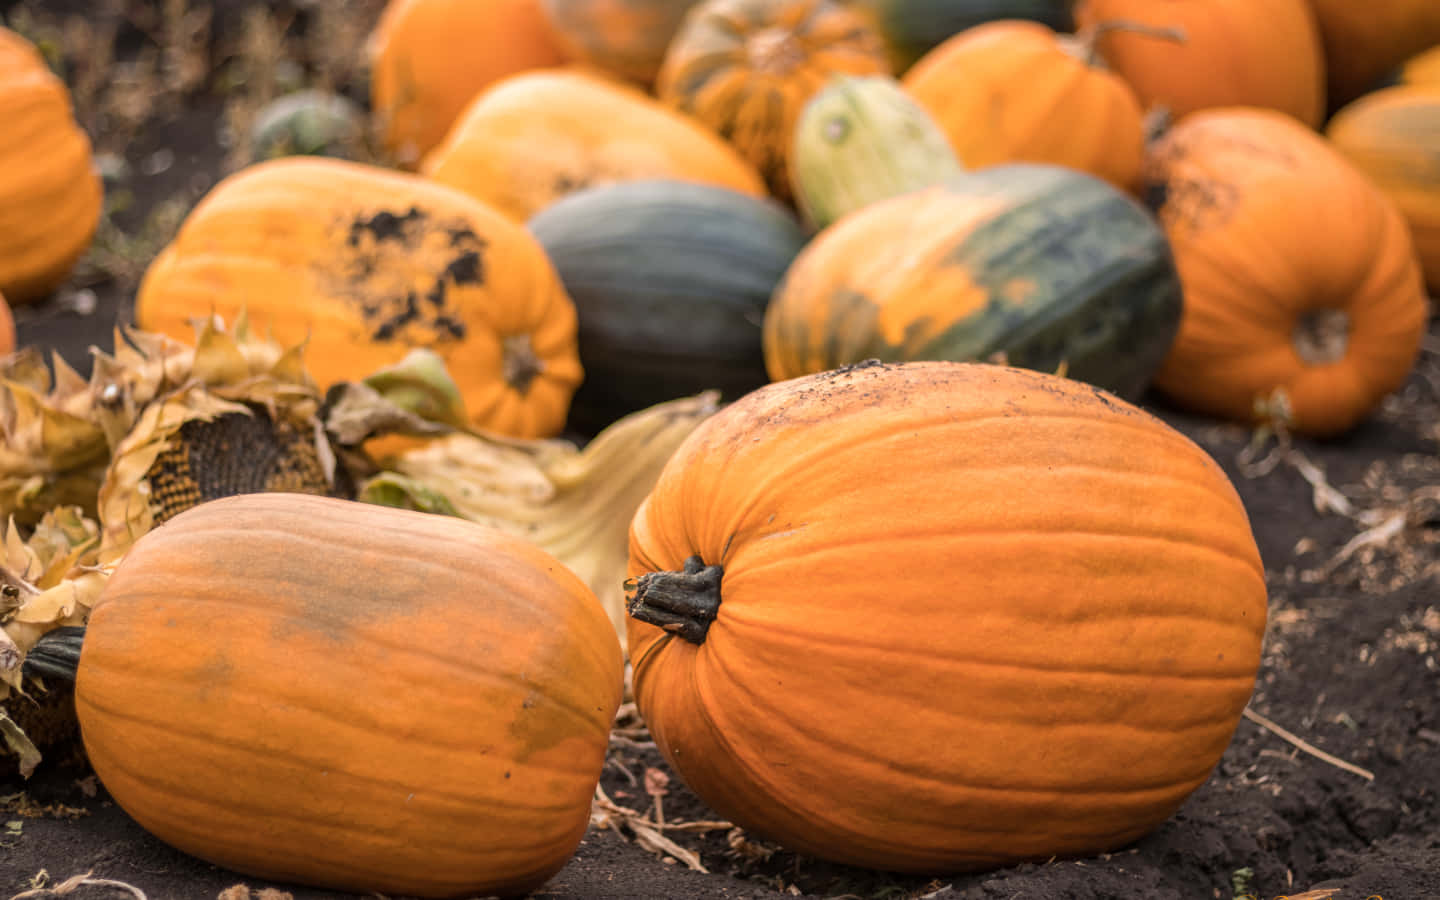 Brighten Up Your Autumn with a Colorful Pumpkin!